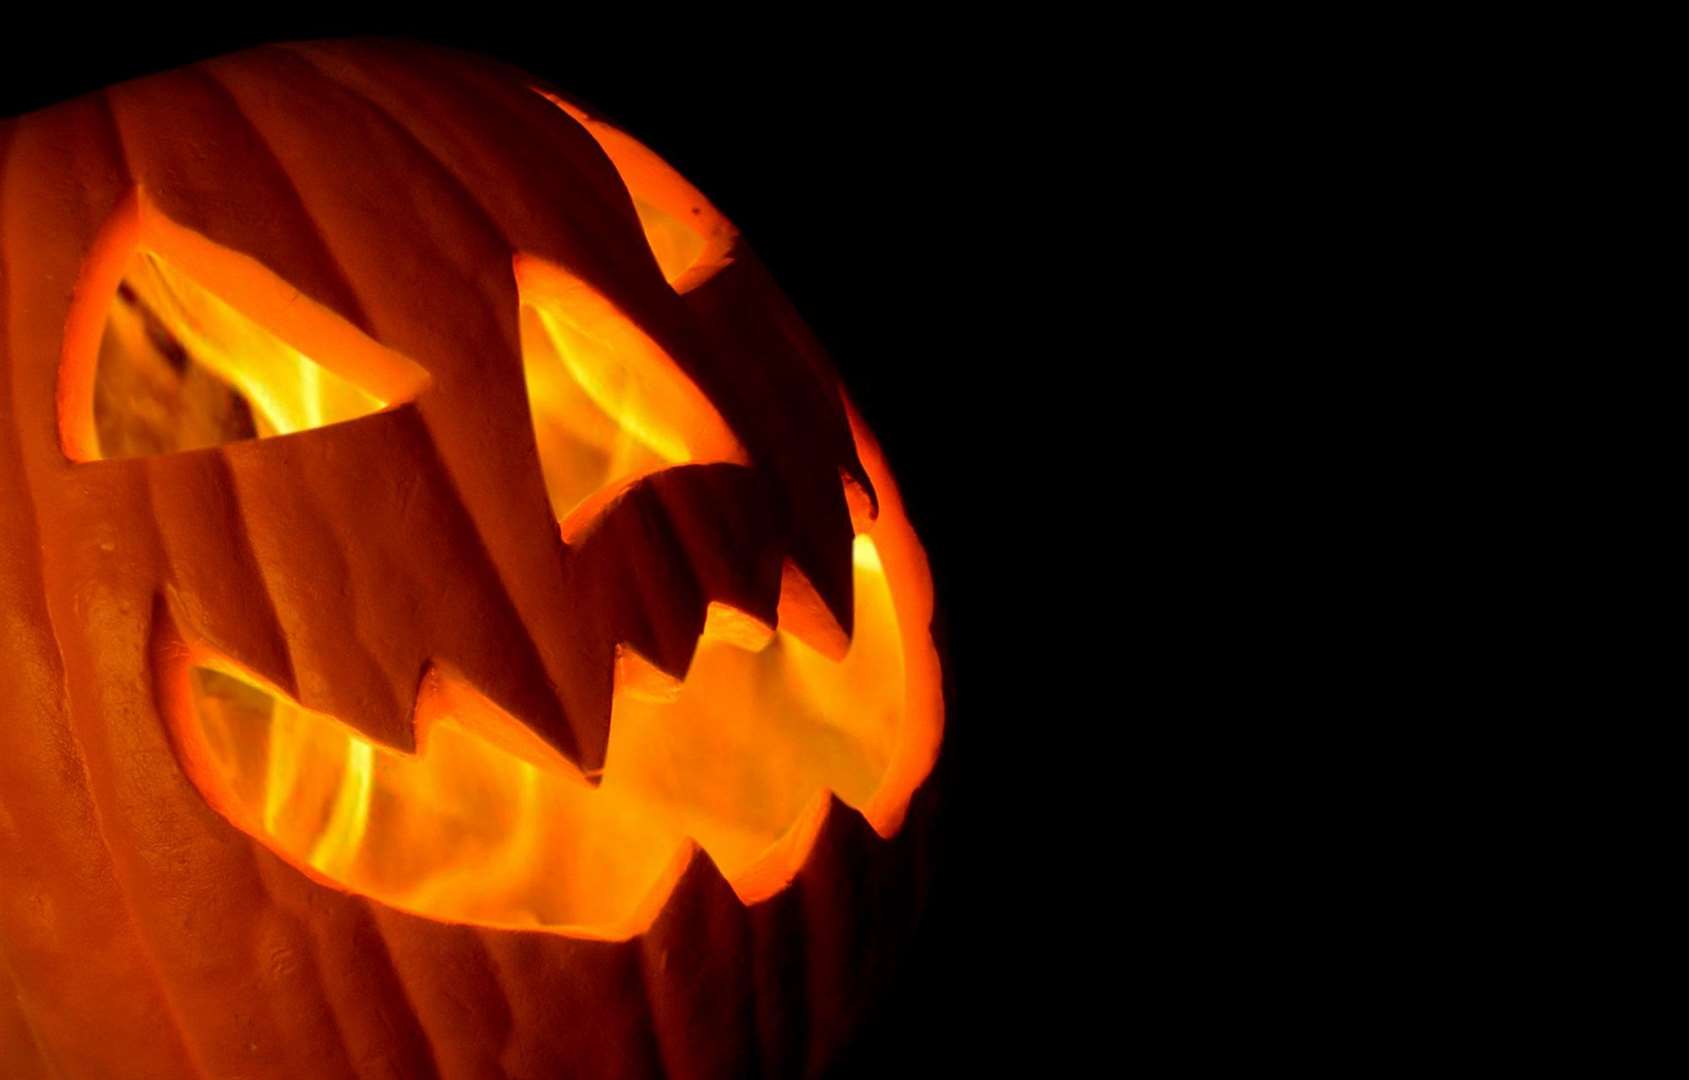 Pumpkins with battery-powered tea lights will be safer on Halloween. Image: iStock.